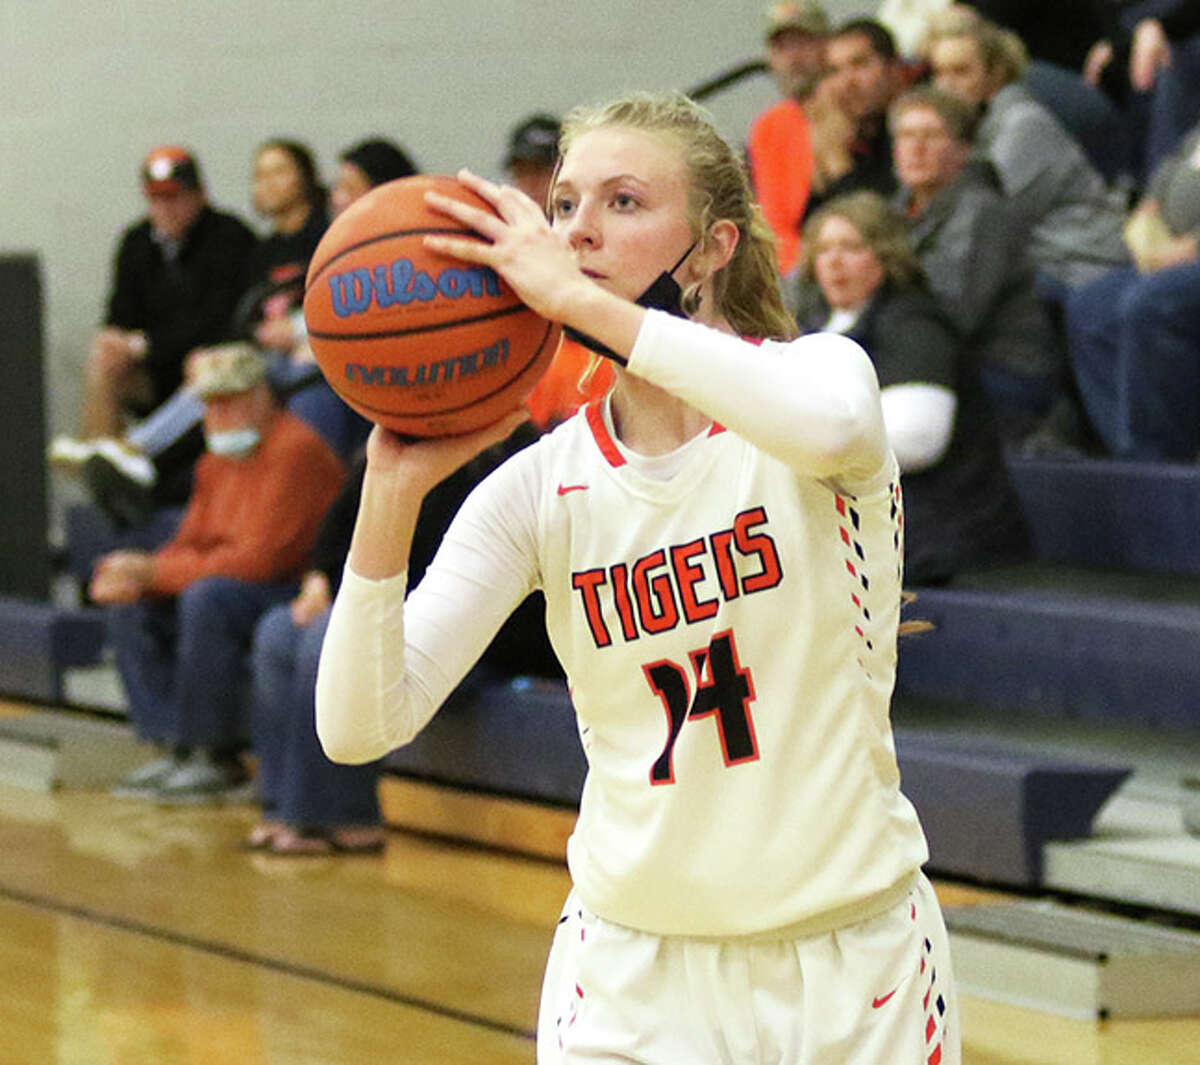 Greenfield's Alexis Pohlman scored 18 points Thursday night, but the Tigers fell to Pittsfield in the North Greene Tourney in White Hall.